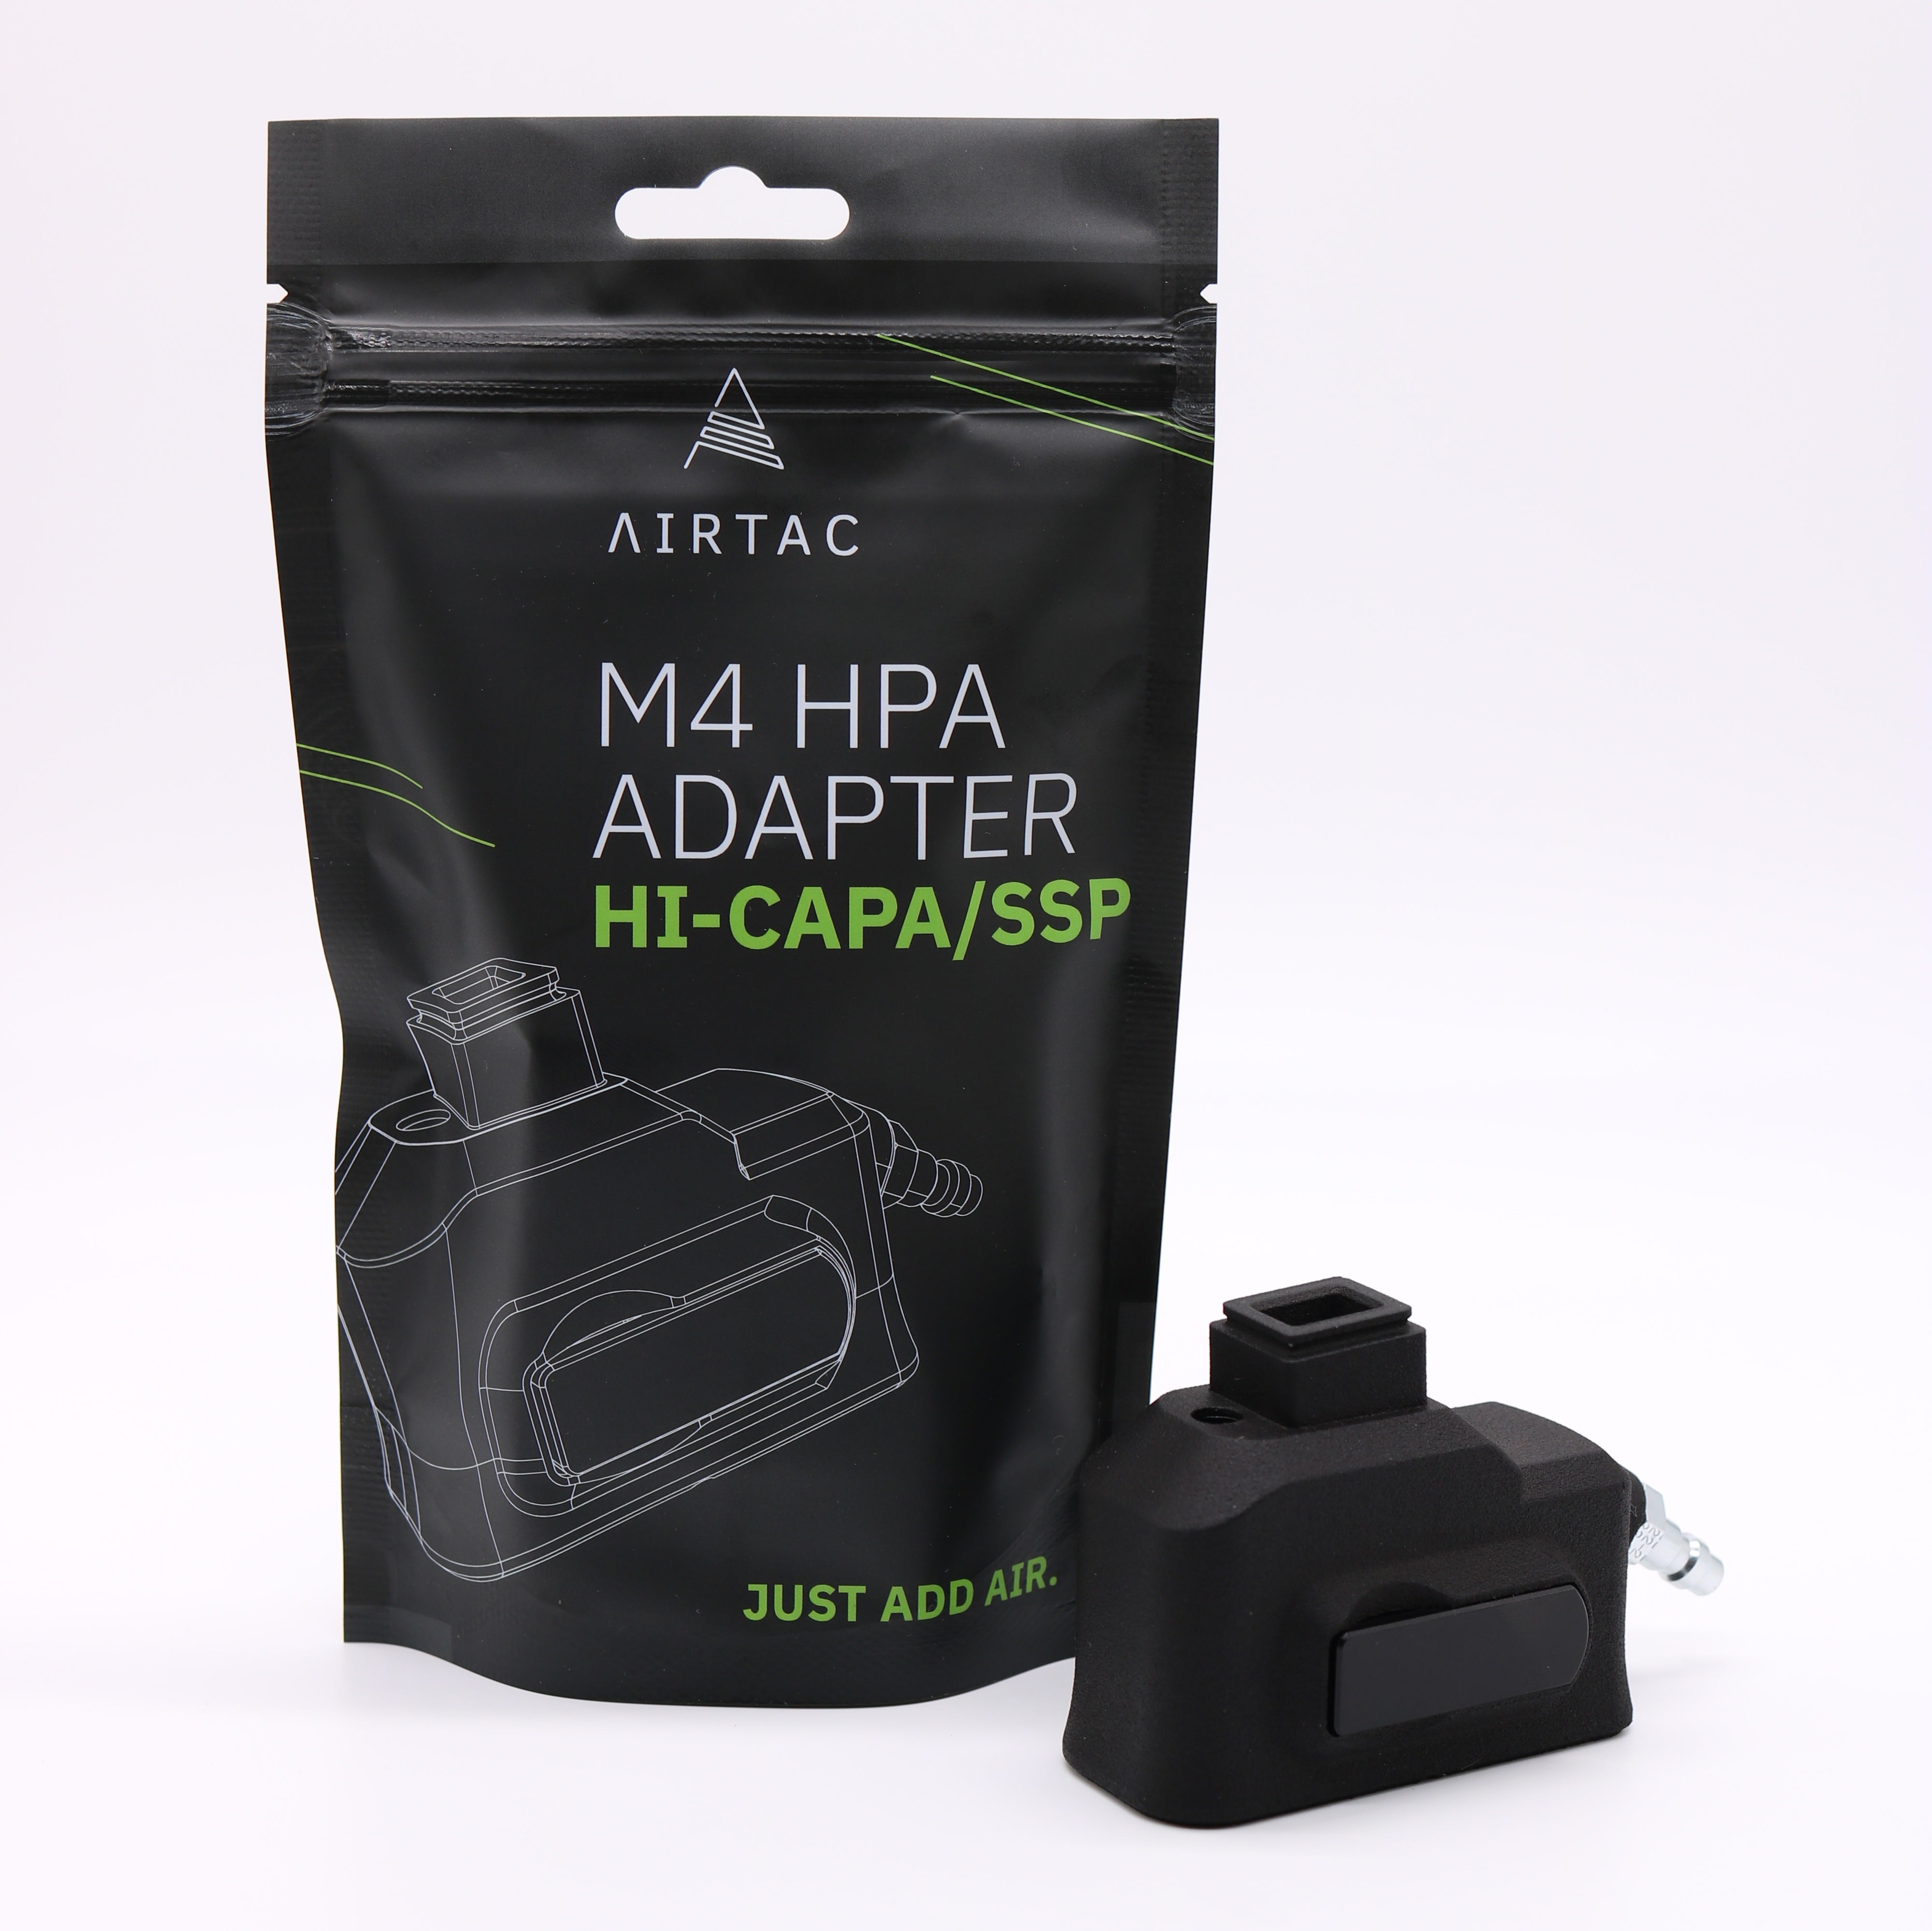 AirTac HiCapa HPA M4 Adapter